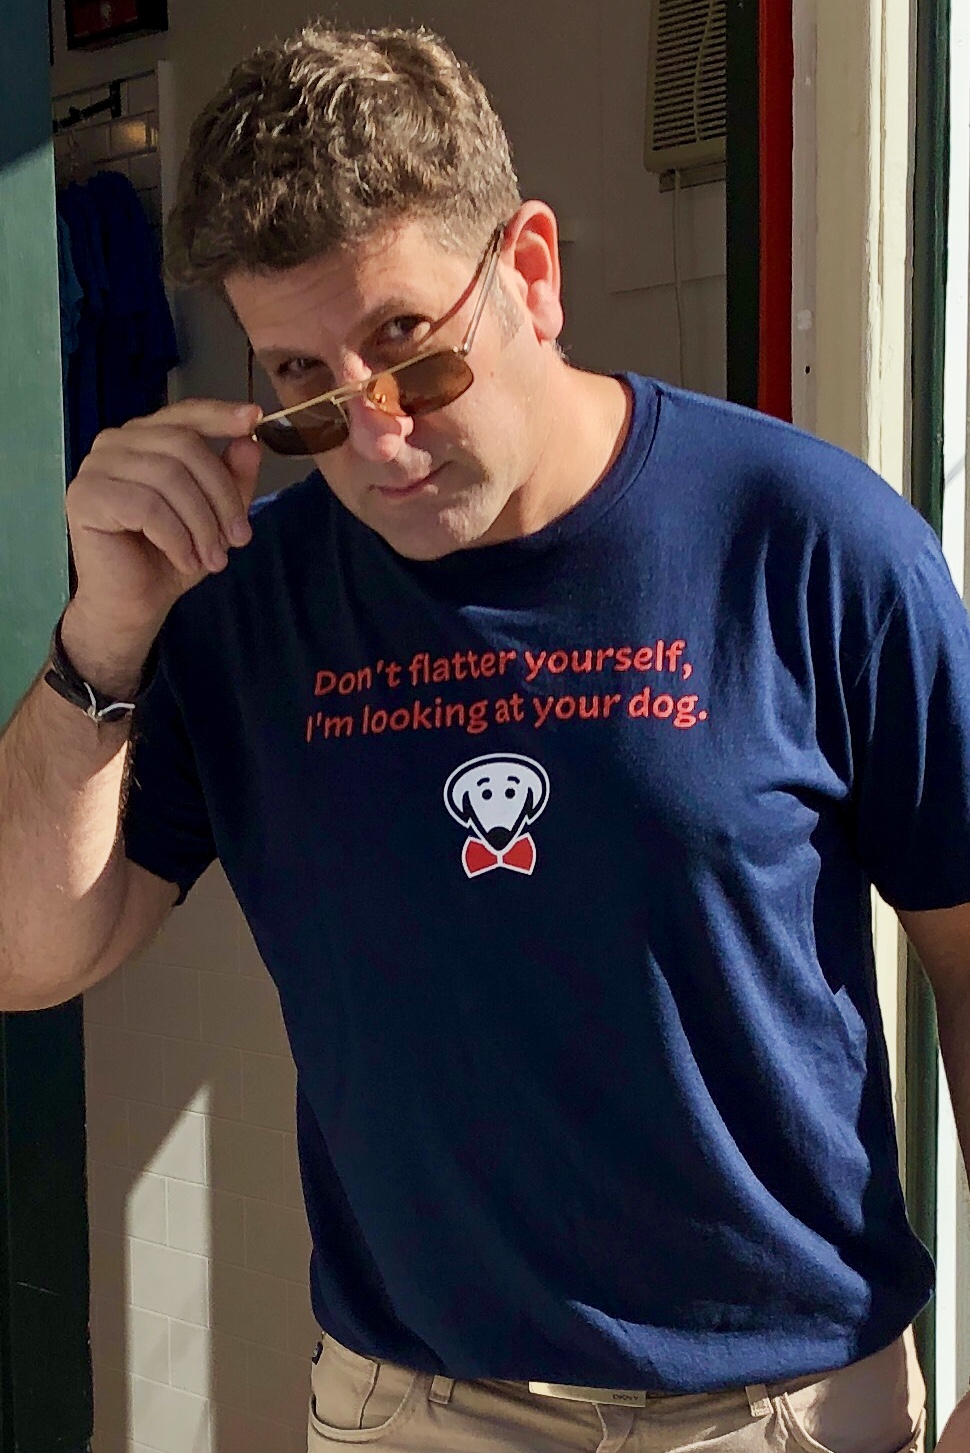 Beau Tyler - Don't flatter yourself, I'm looking at your dog. temp shirt pic